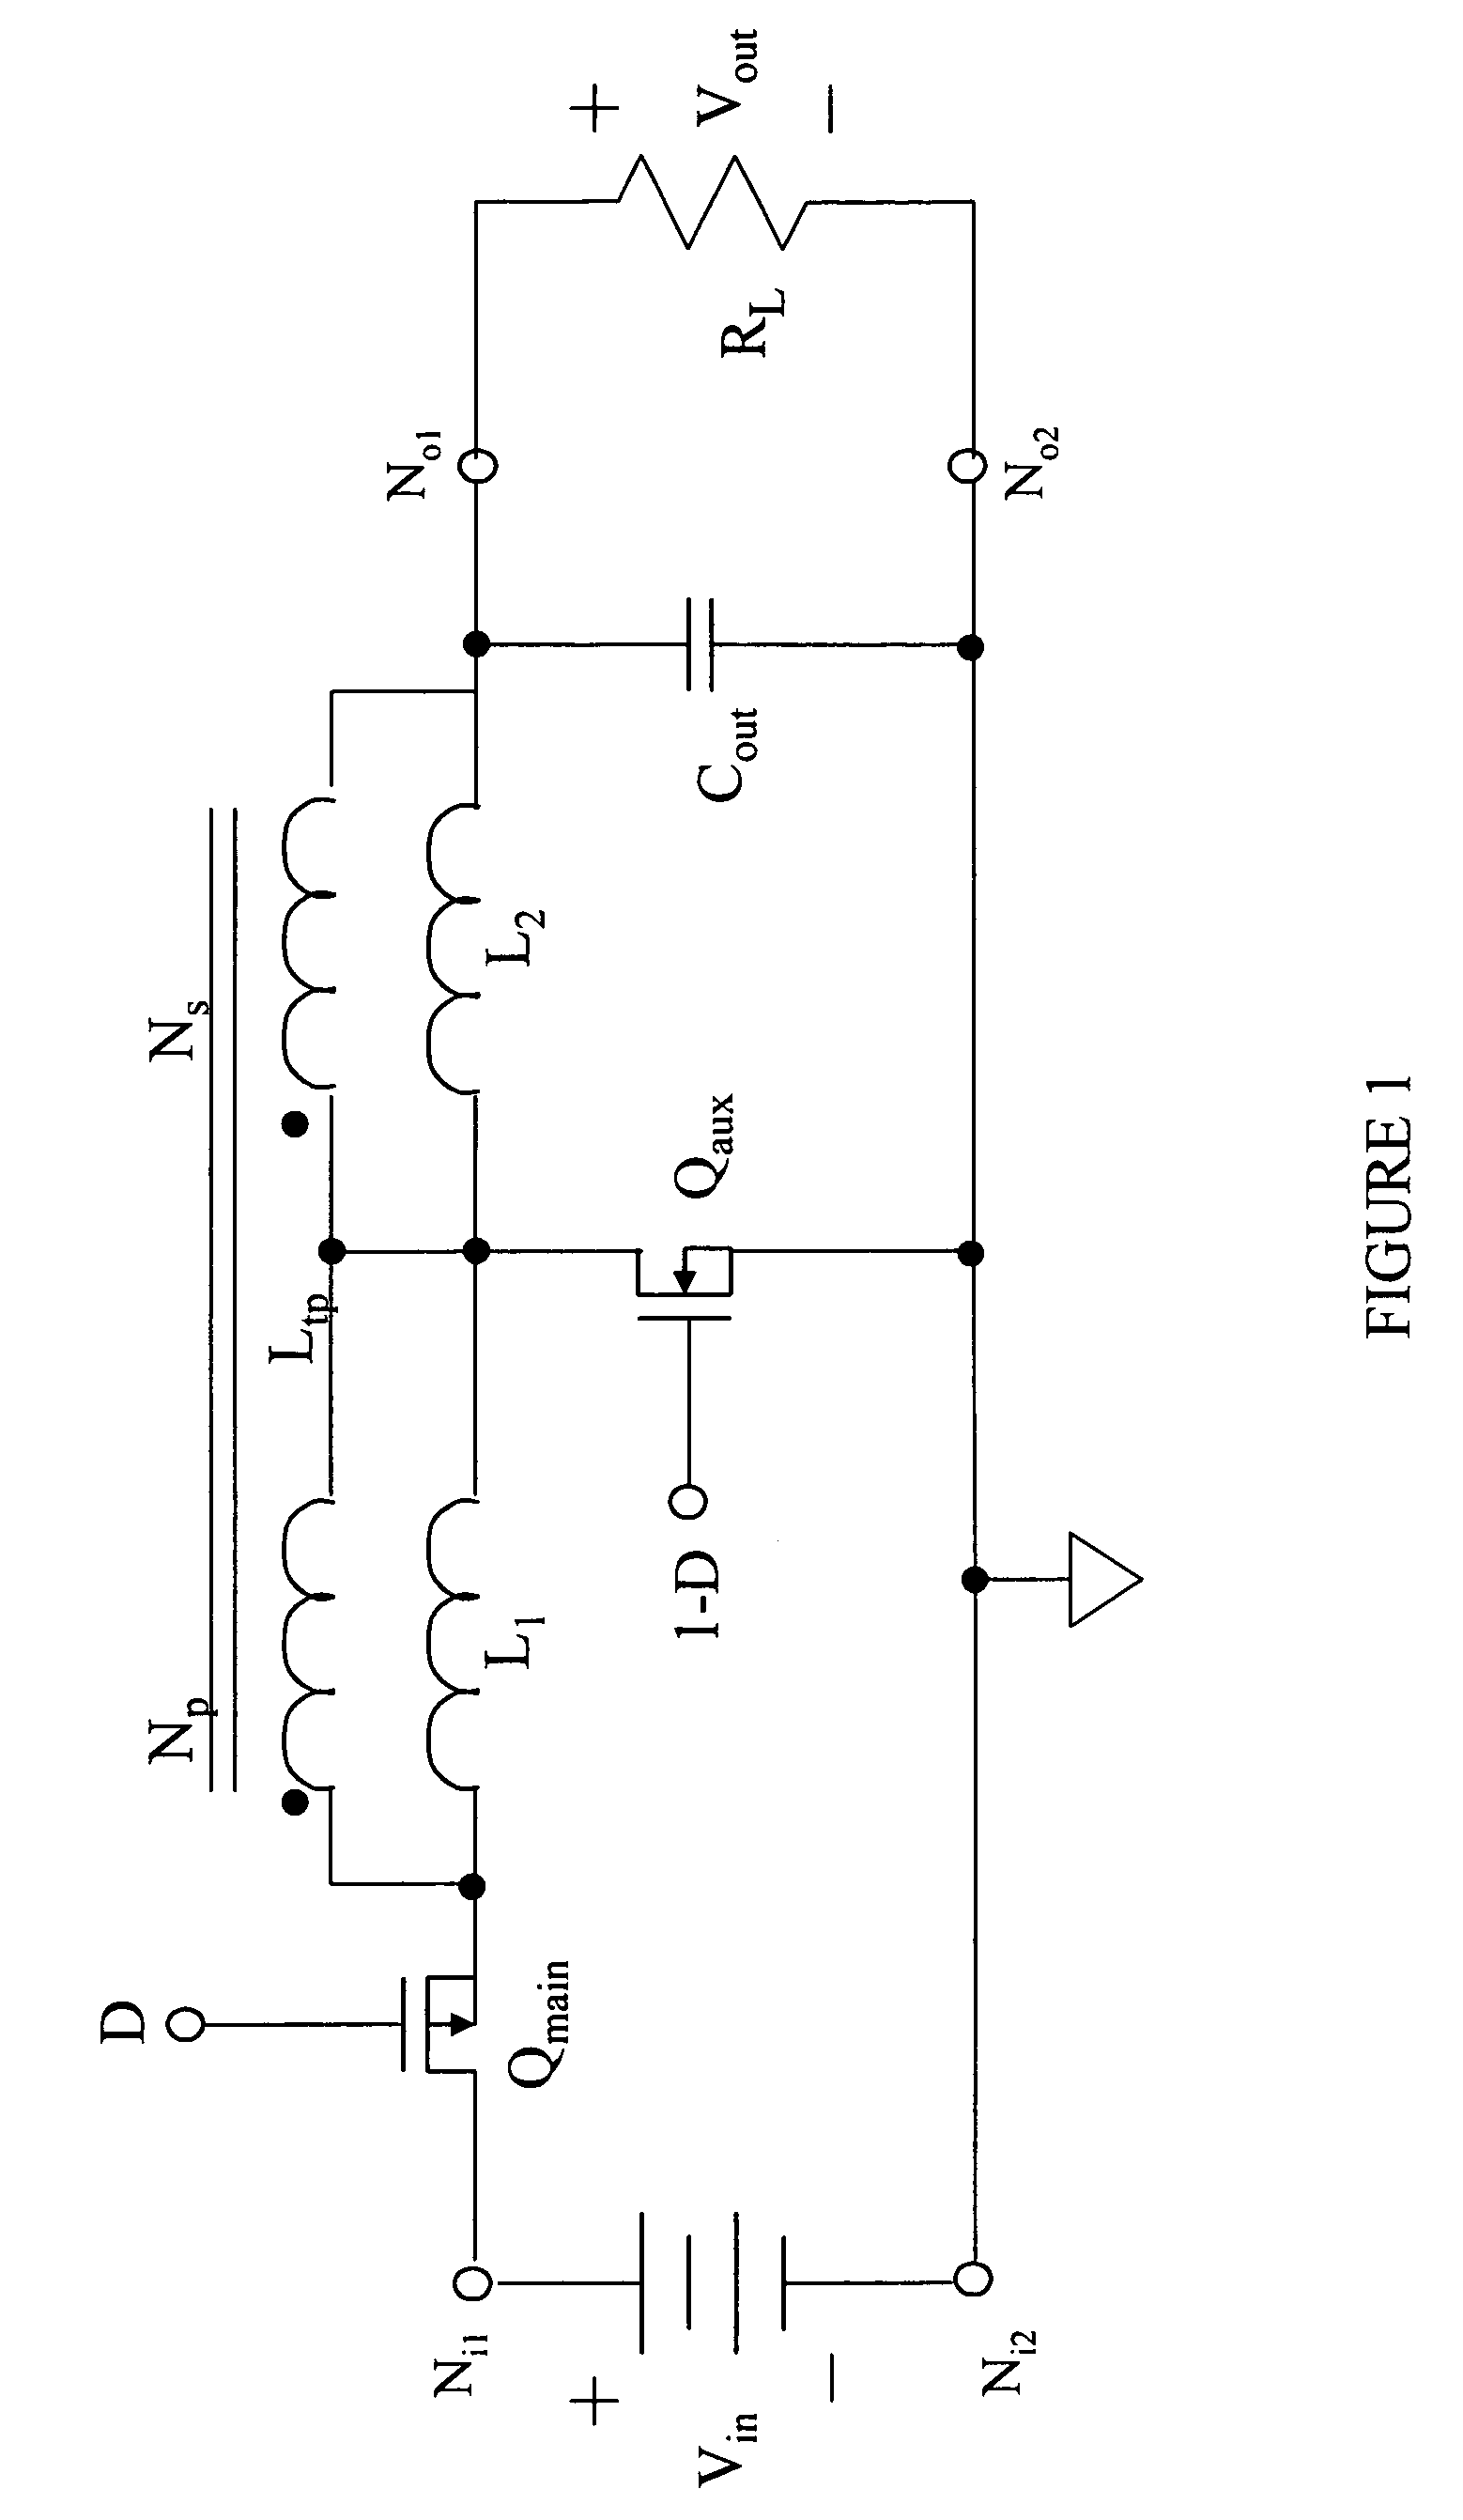 Power converter employing a tapped inductor and integrated magnetics and method of operating the same